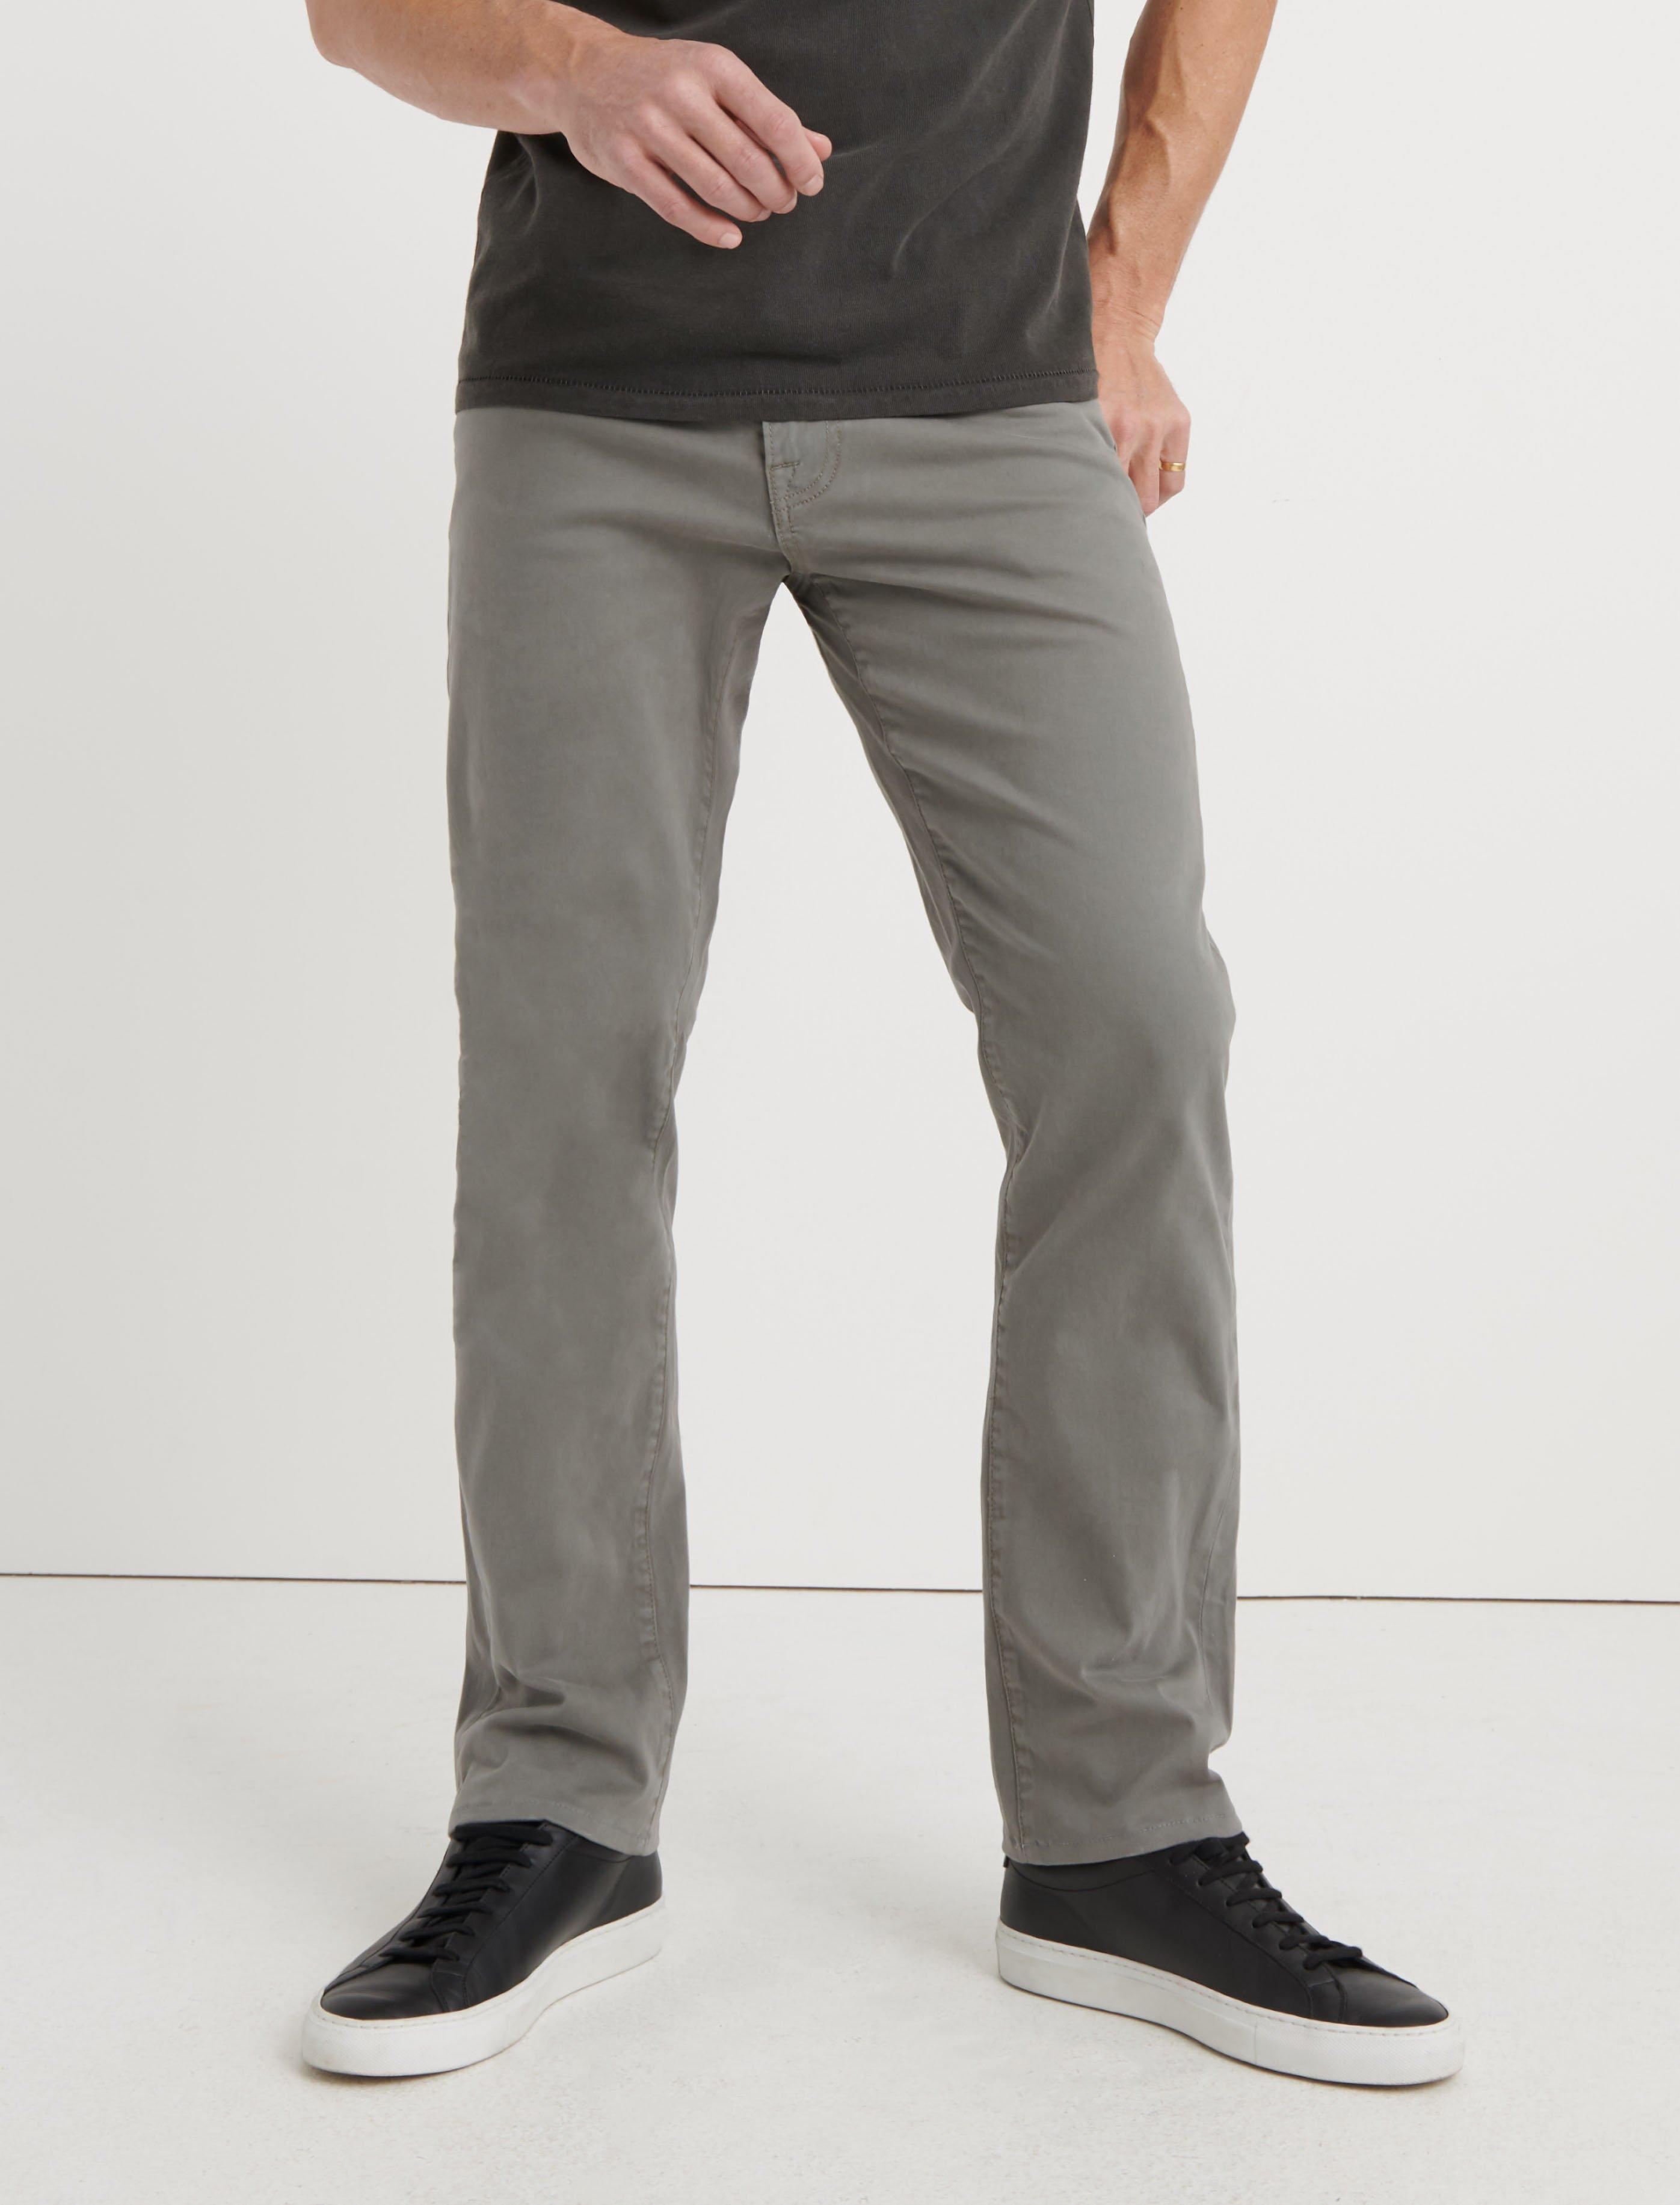 lucky brand 410 athletic fit grey